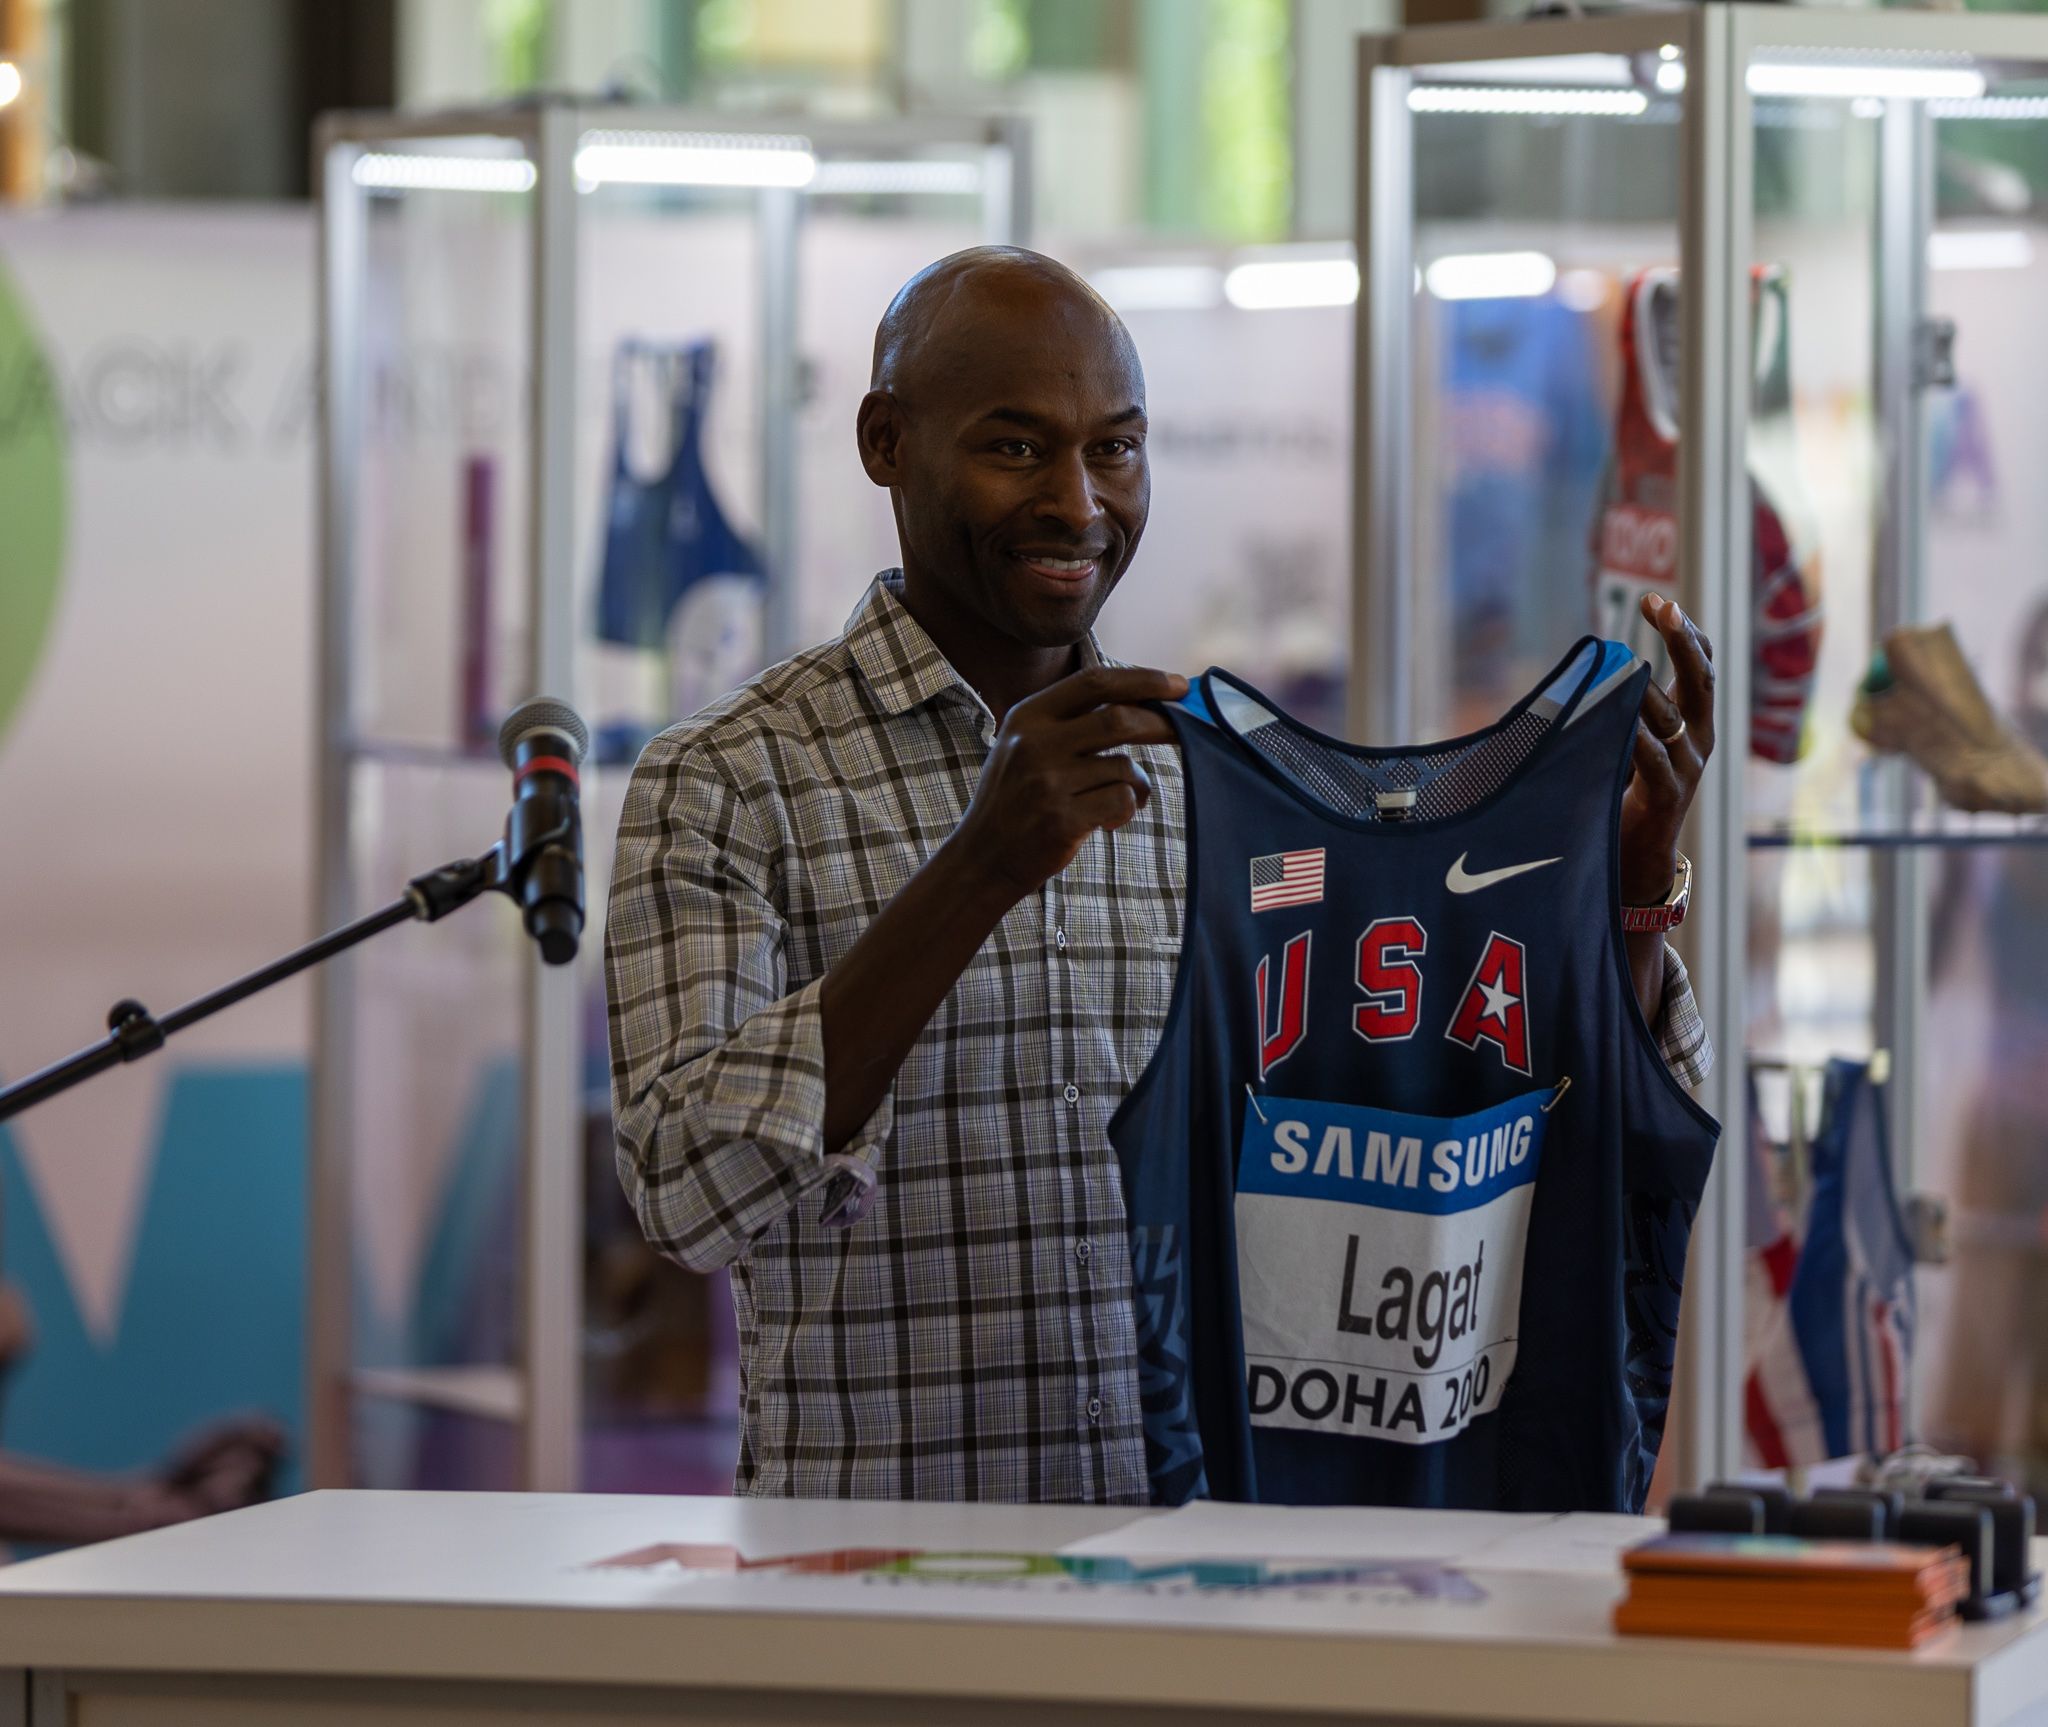 Bernard Lagat with his vest at the MOWA Track & Field Heritage Exhibition Oregon22 in Eugene